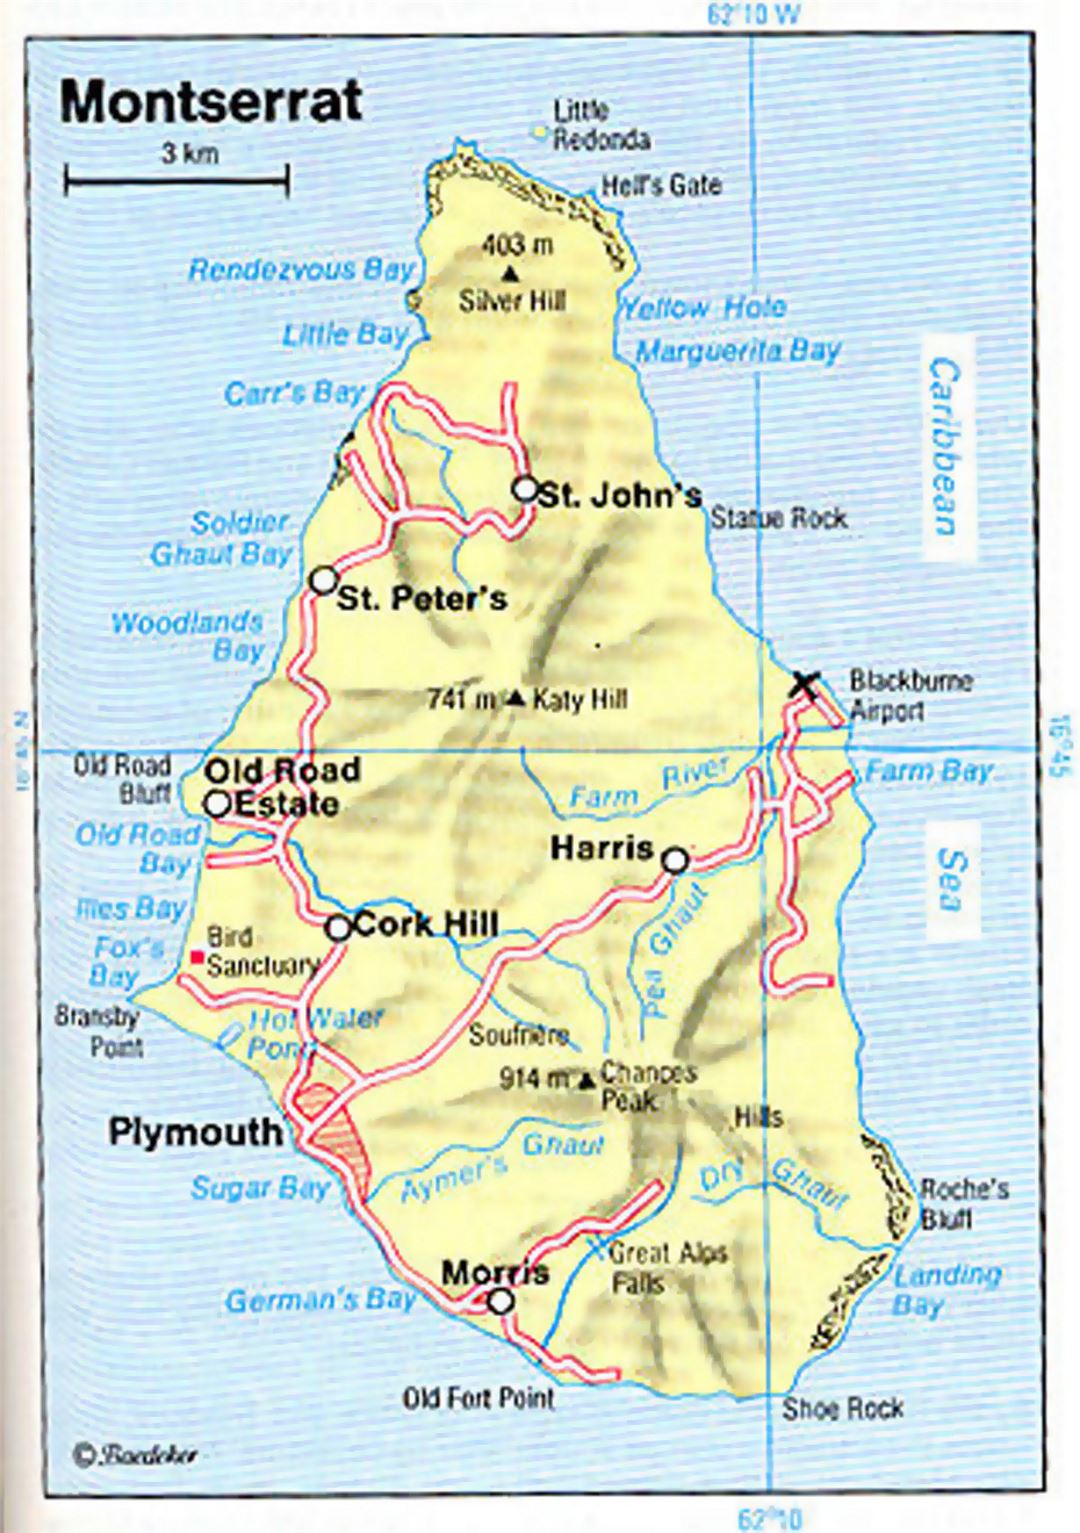 Road map of Montserrat island with relief